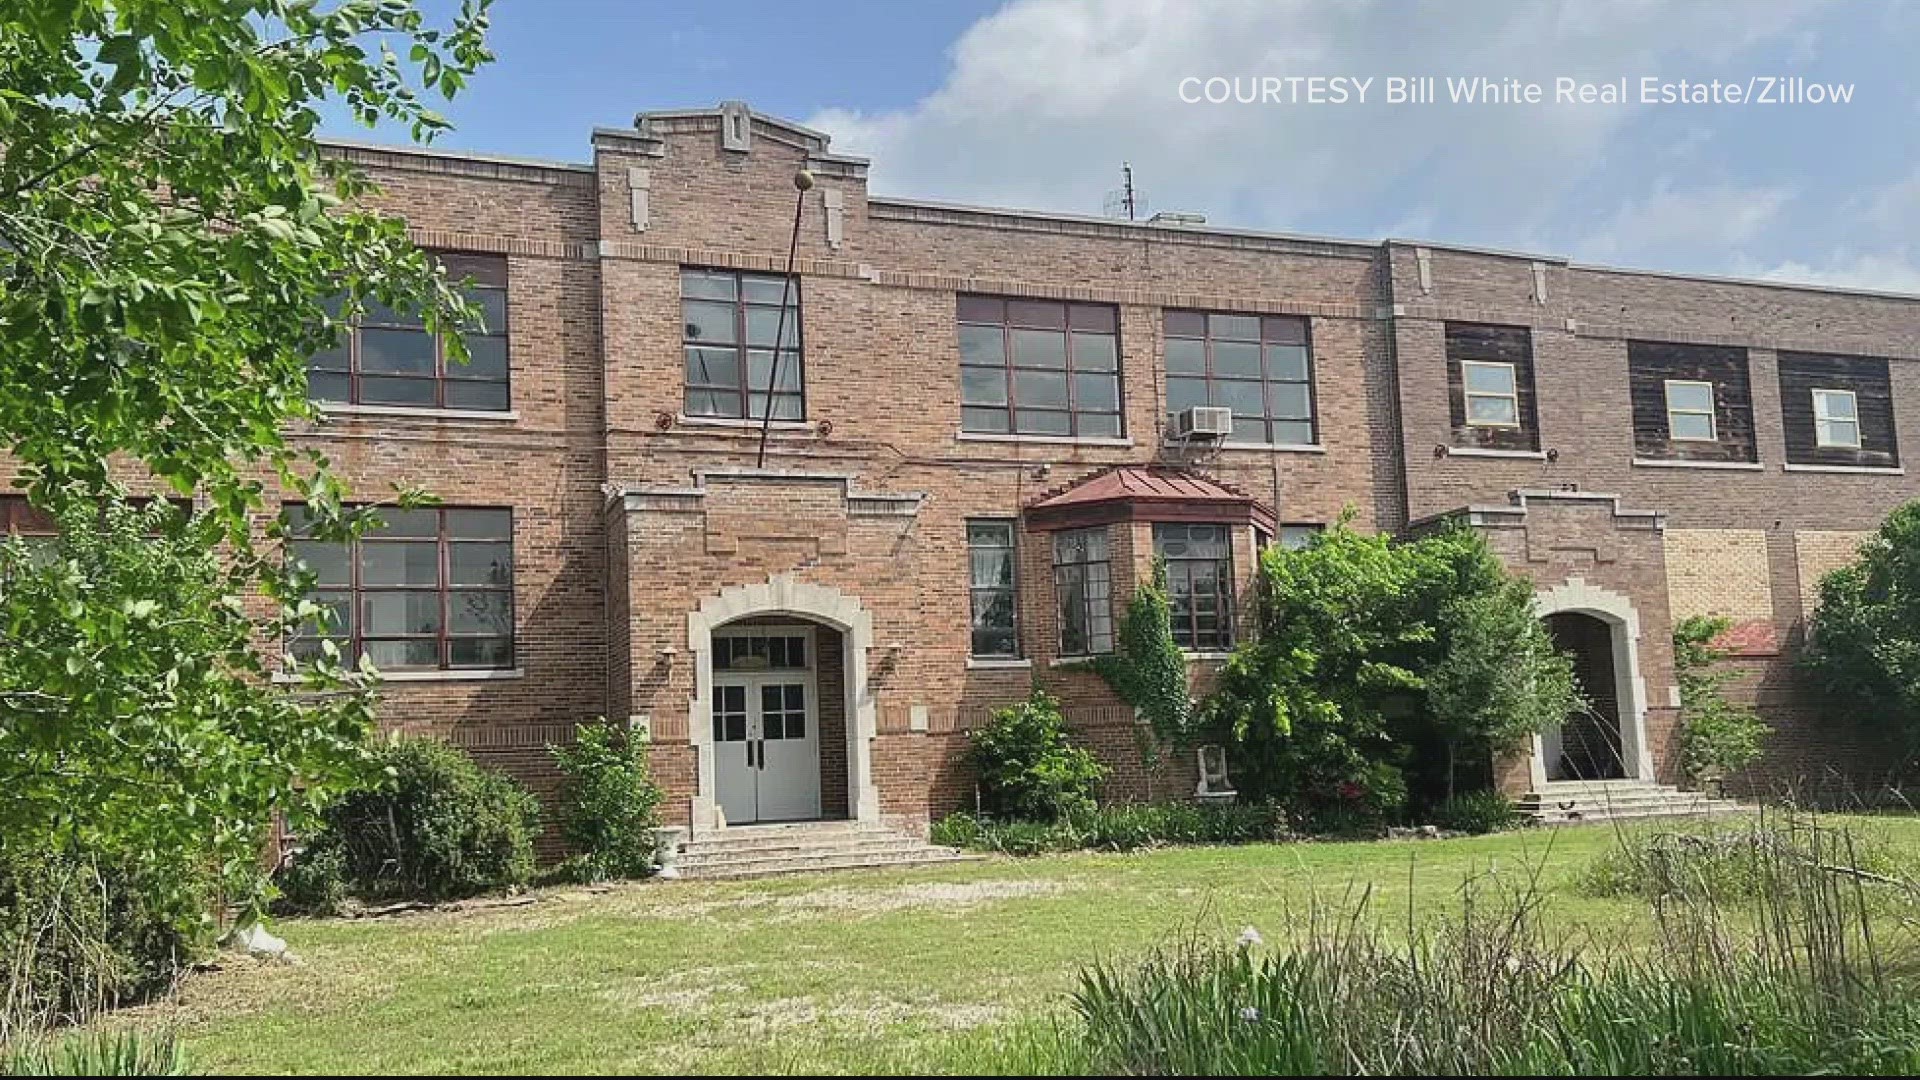 An old high school in Burbank, Oklahoma, has been listed for sale as a sing-family home.